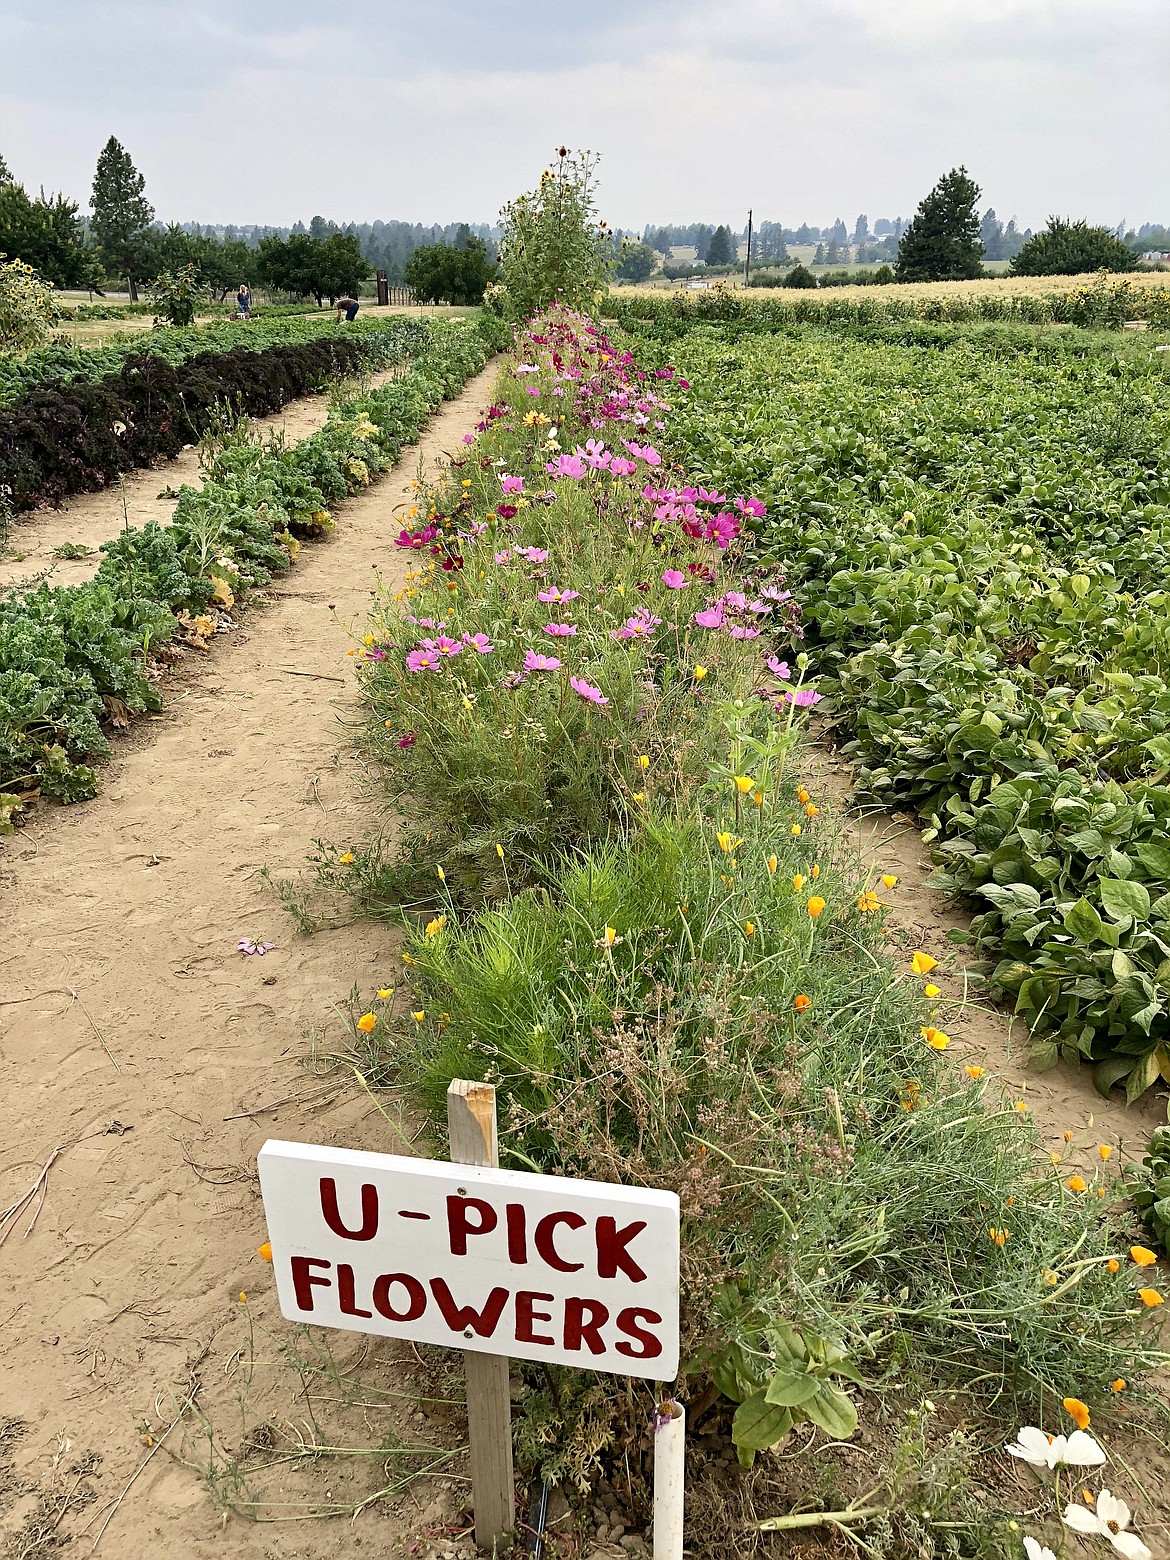 A row of &#147;U-Pick Flowers&#148; adds some color to rows of green plants at Green Bluff.